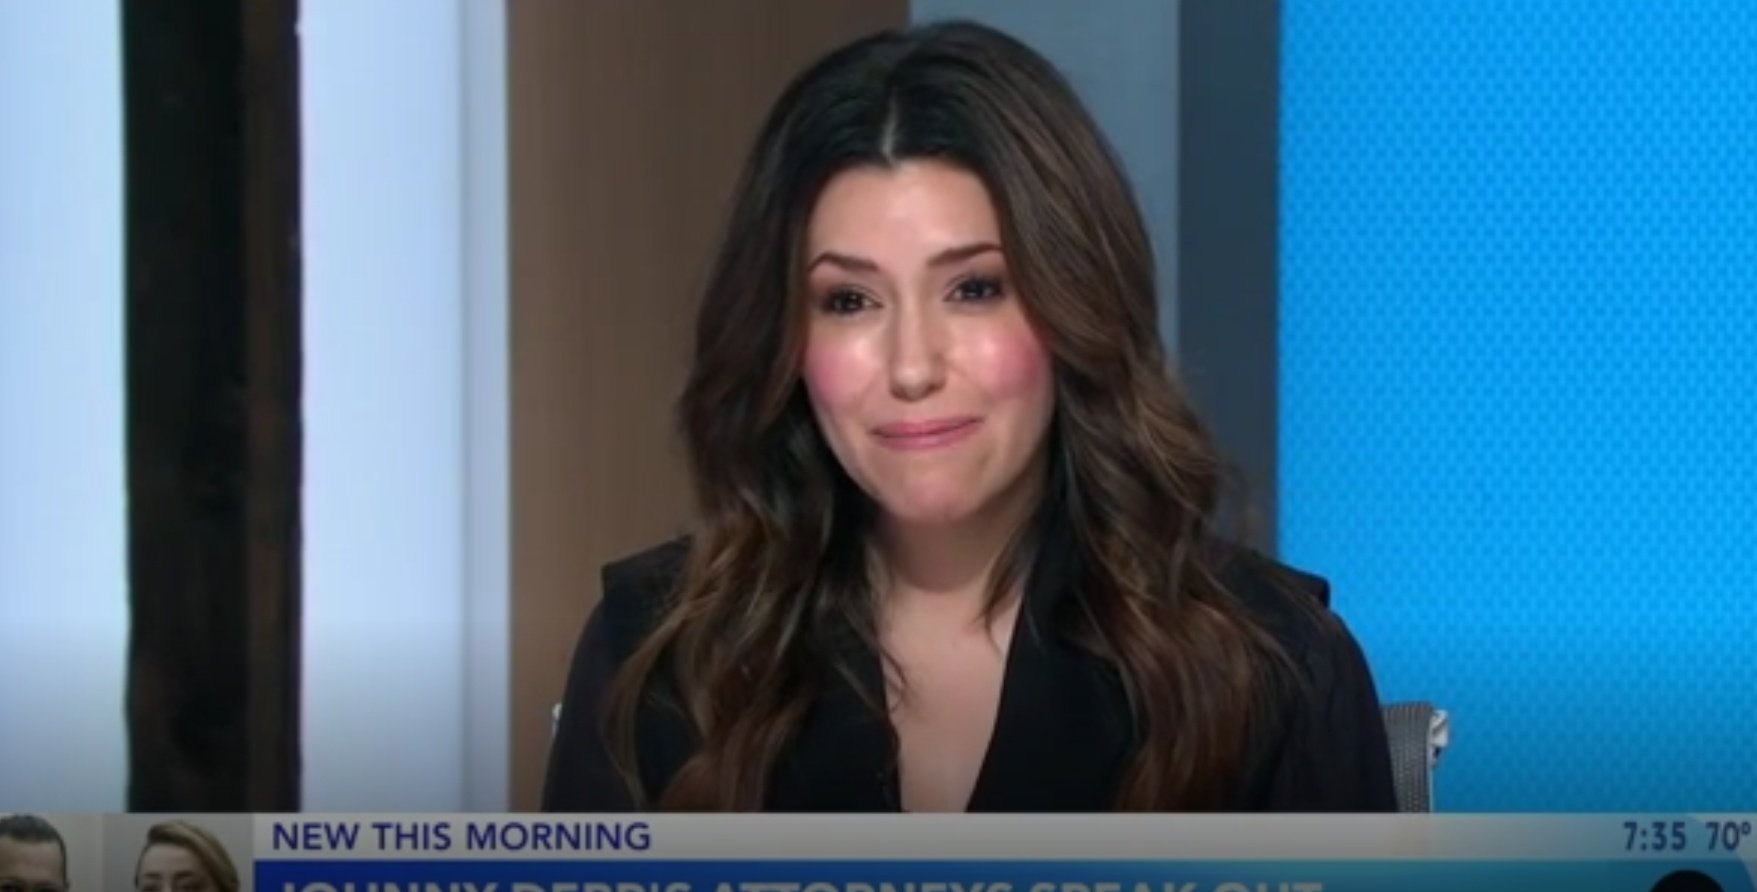 Camille Vasquez made an appearance on Good Morning America